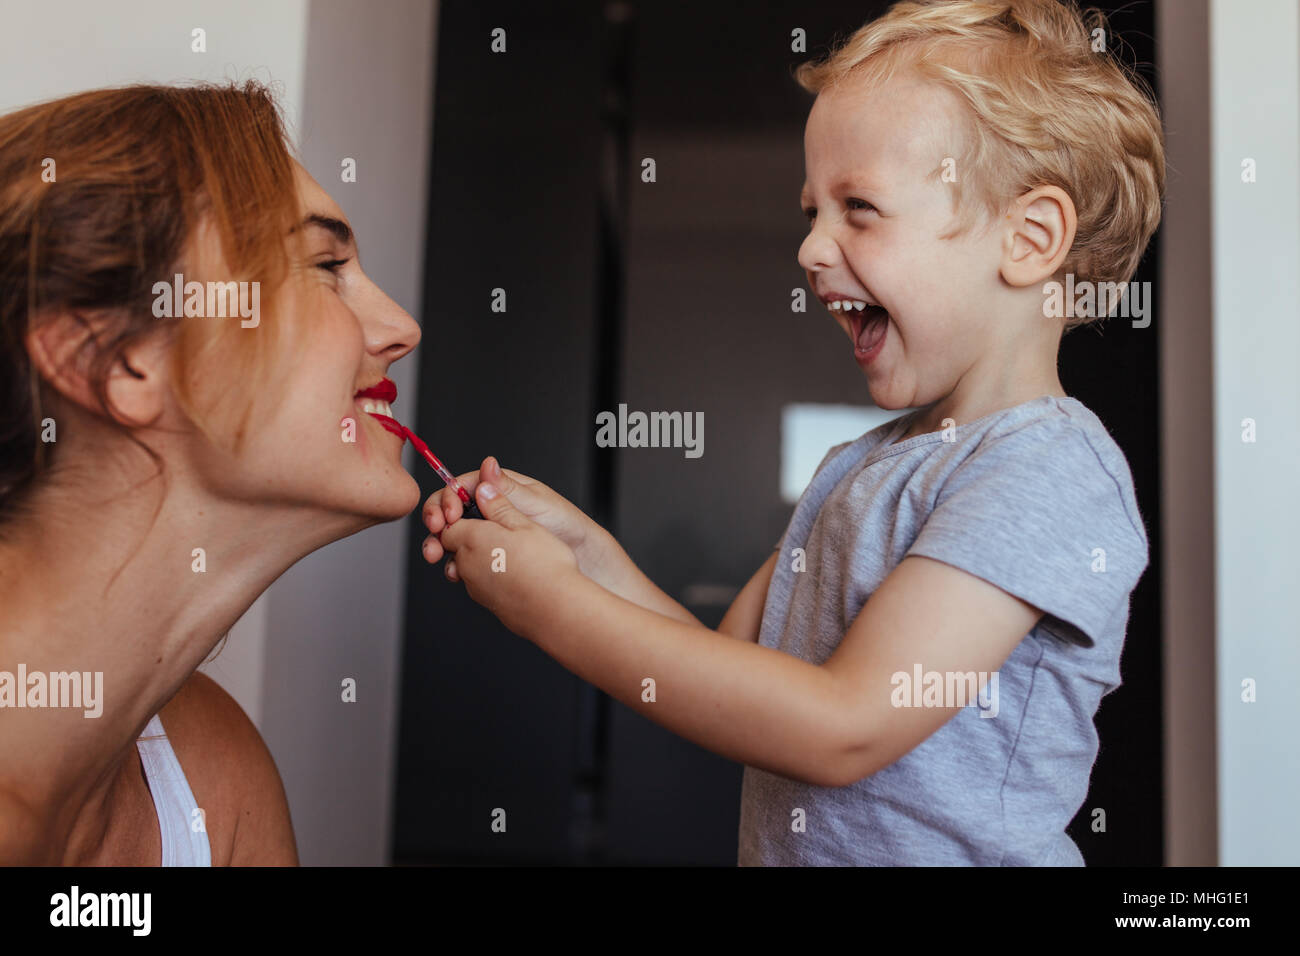 Smiling little boy putting on the makeup to her mother. Happy mother and son playing with makeup at home. Stock Photo